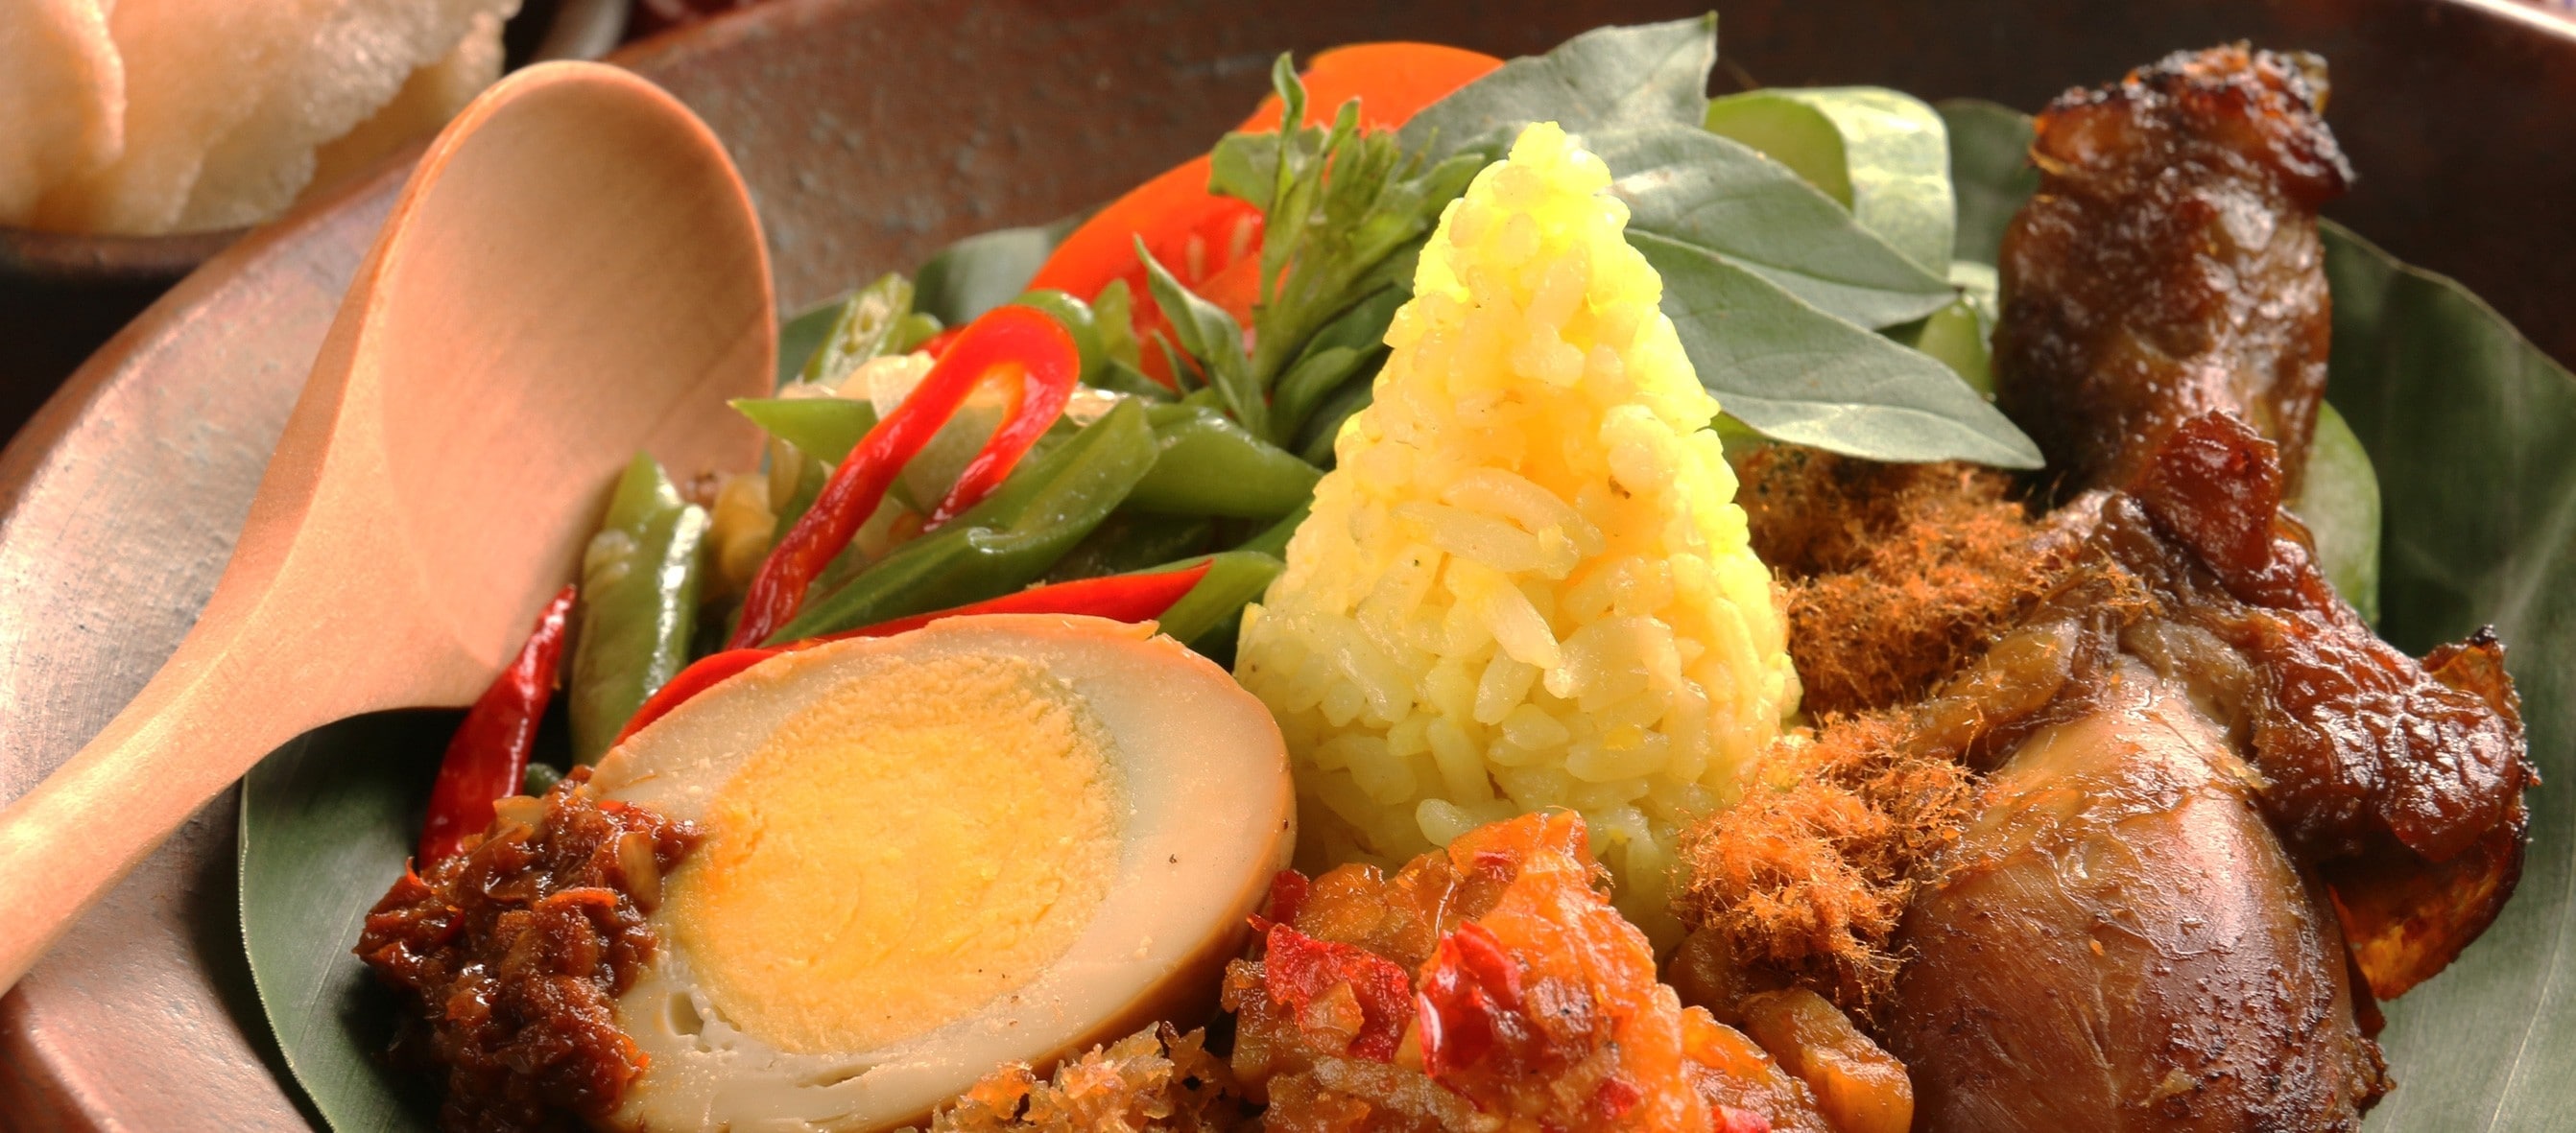 BE DELIGHTED WITH YOGYAKARTA'S DELICIOUS AND LUSCIOUS DELICACIES